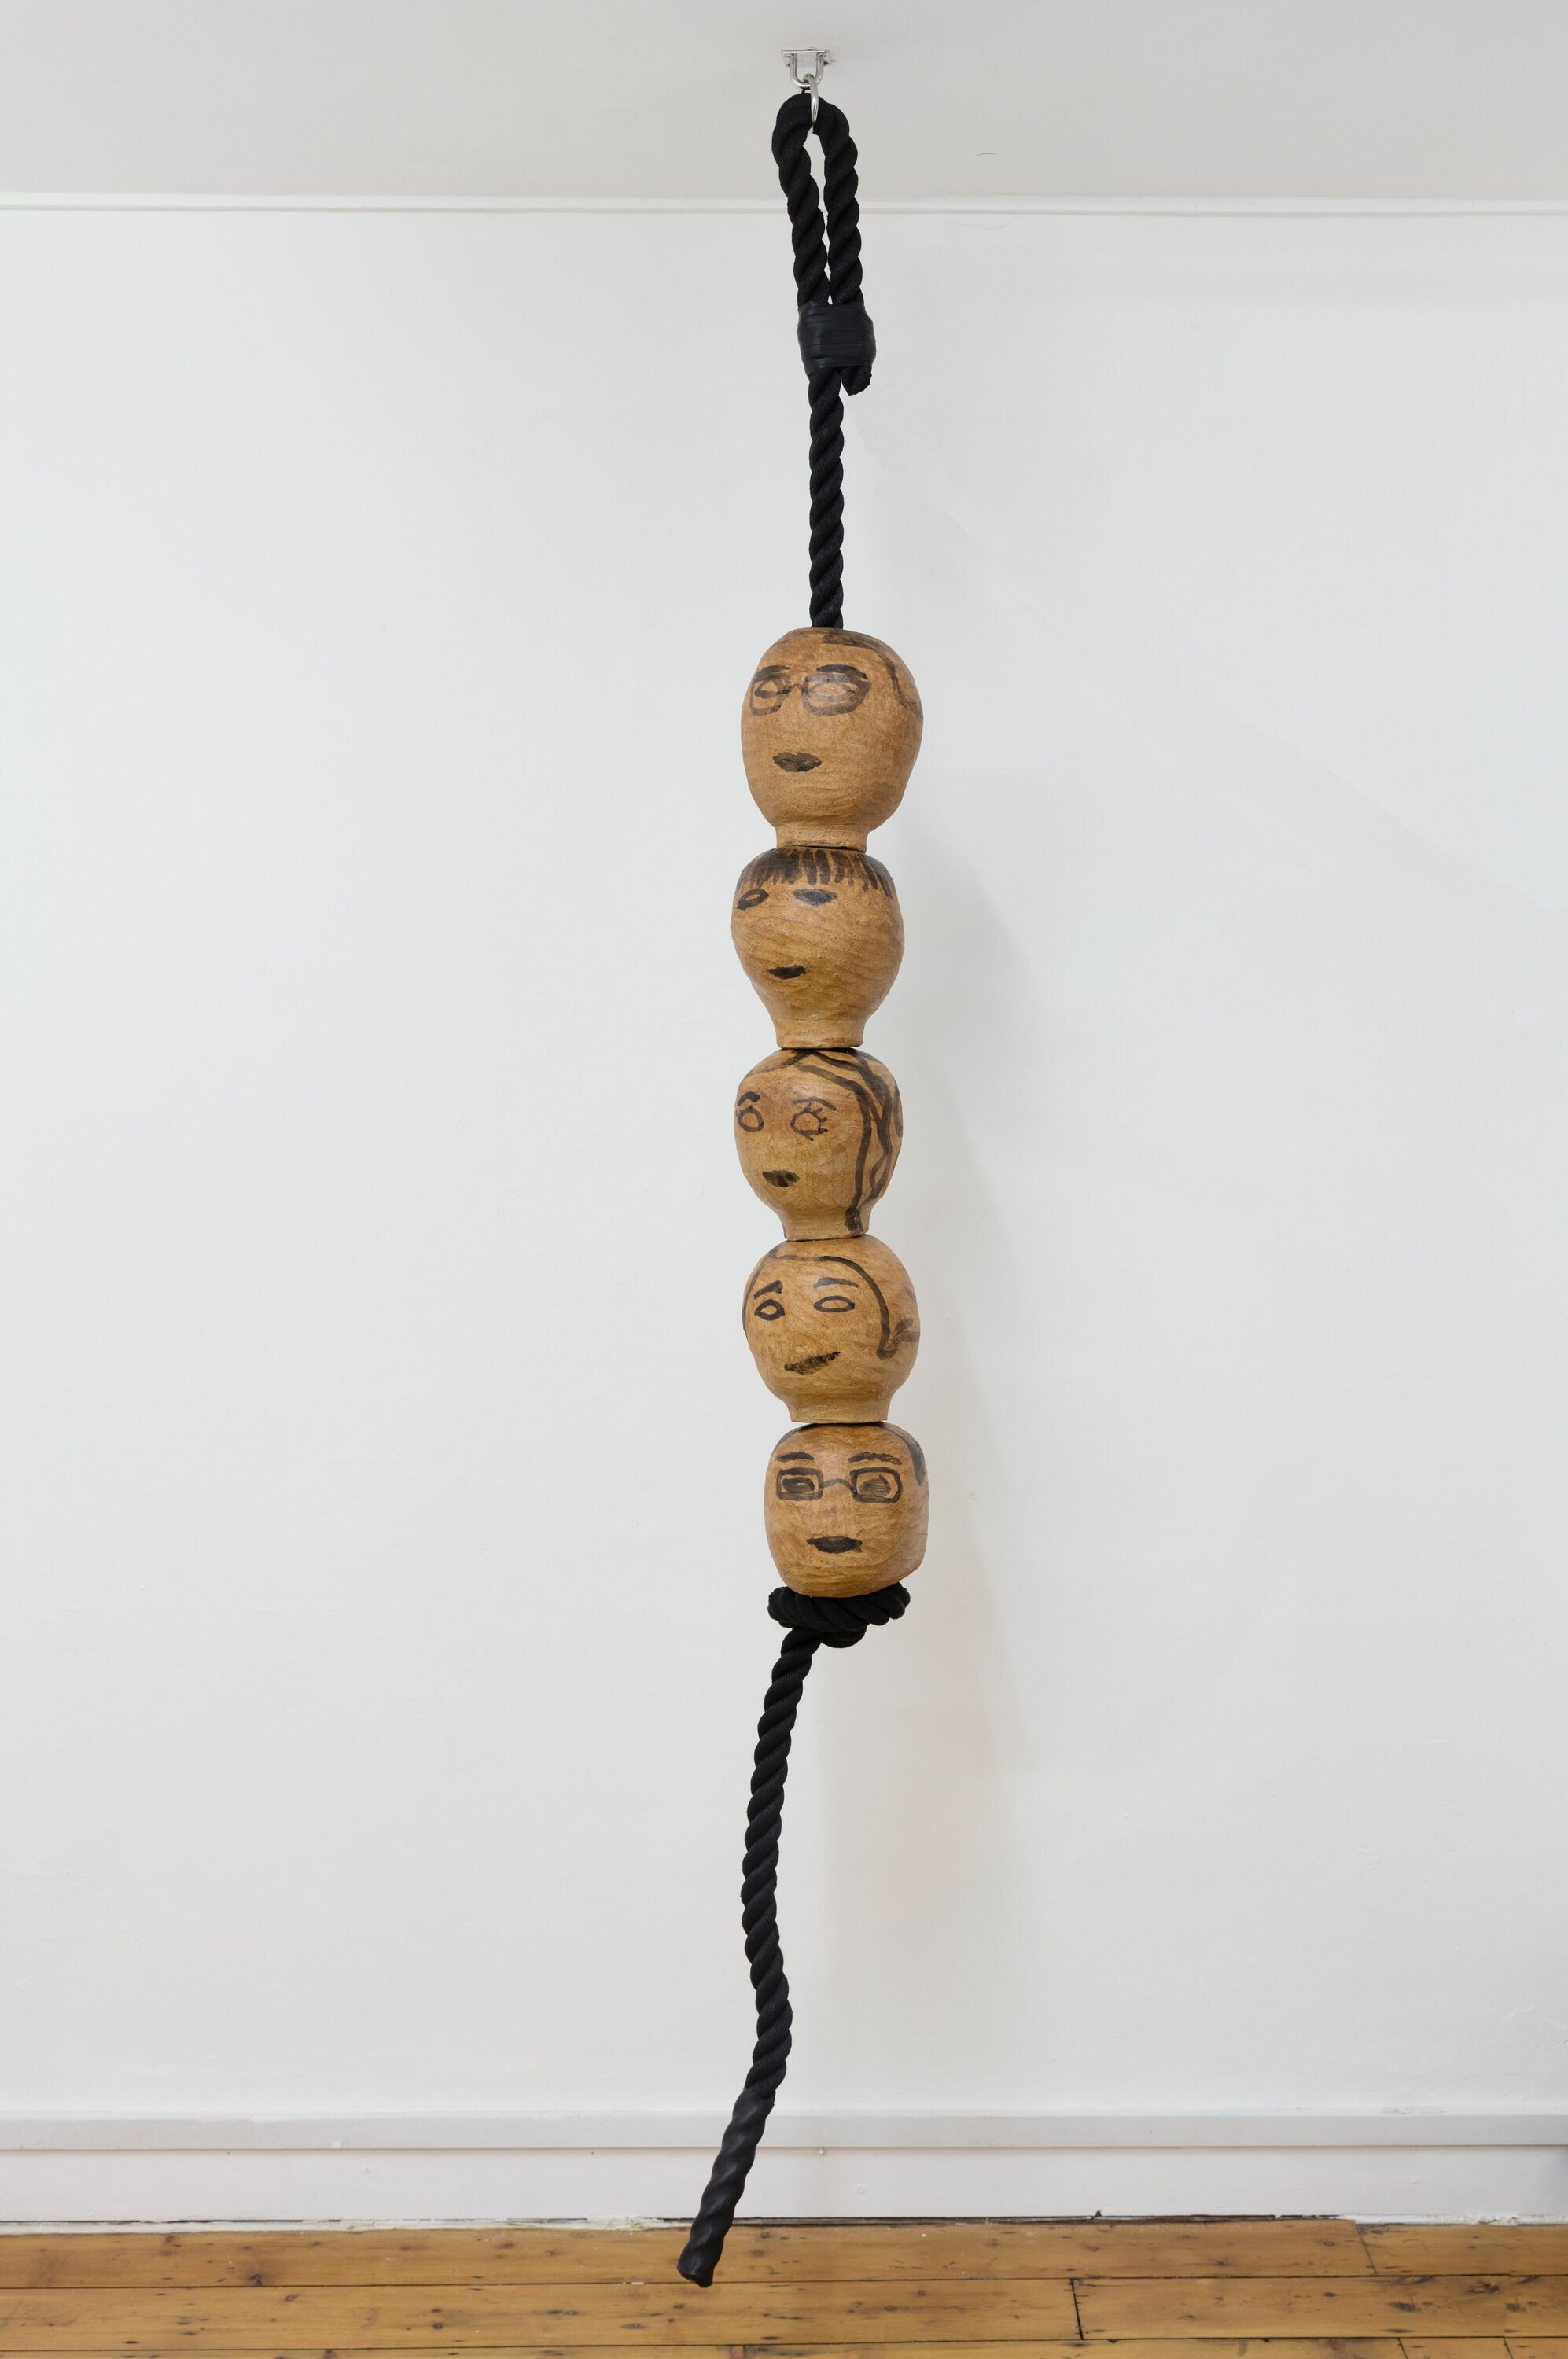 Sidsel Meineche Hansen, Banked, ceramics, solid training rope, 2017